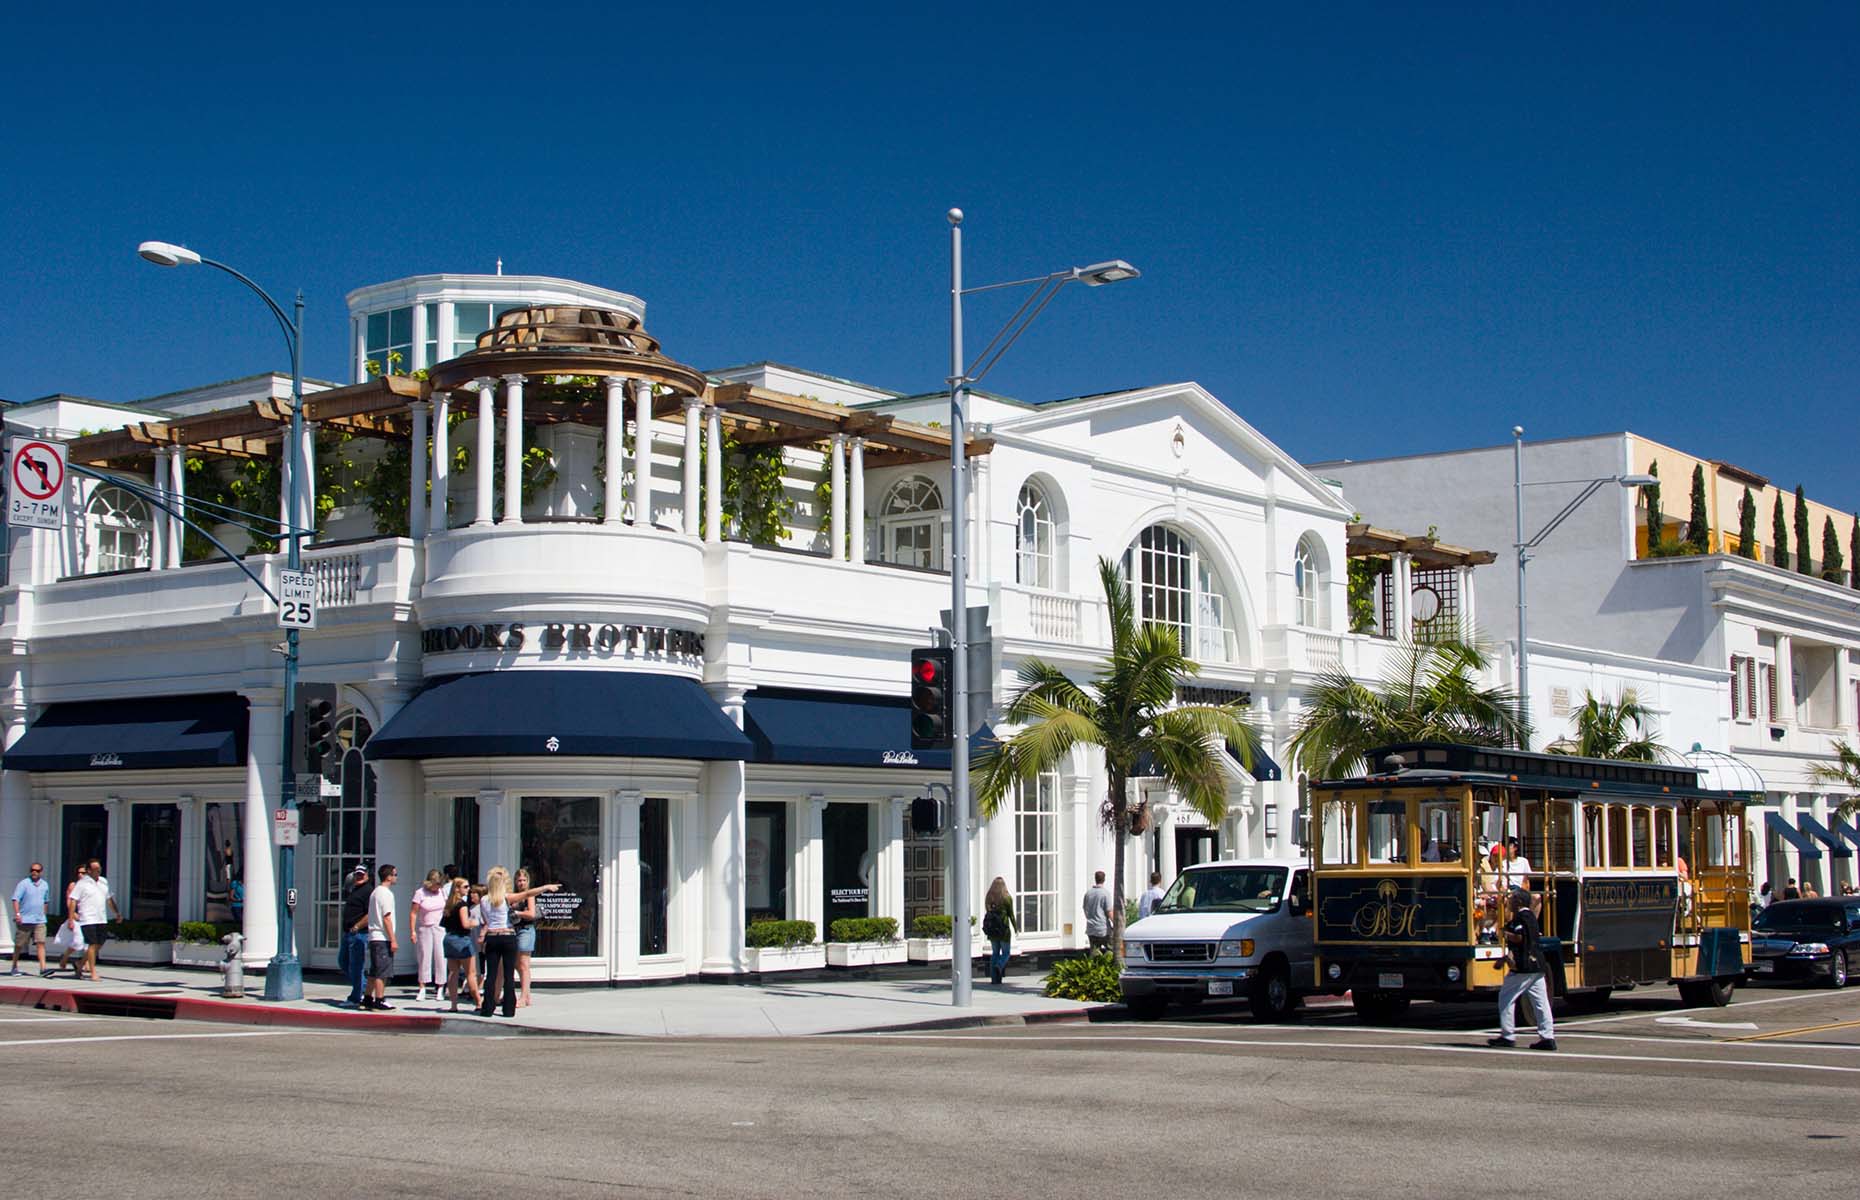 Beverly Hills trolley car (Image: LE Robshaw/Alamy Stock Photo)